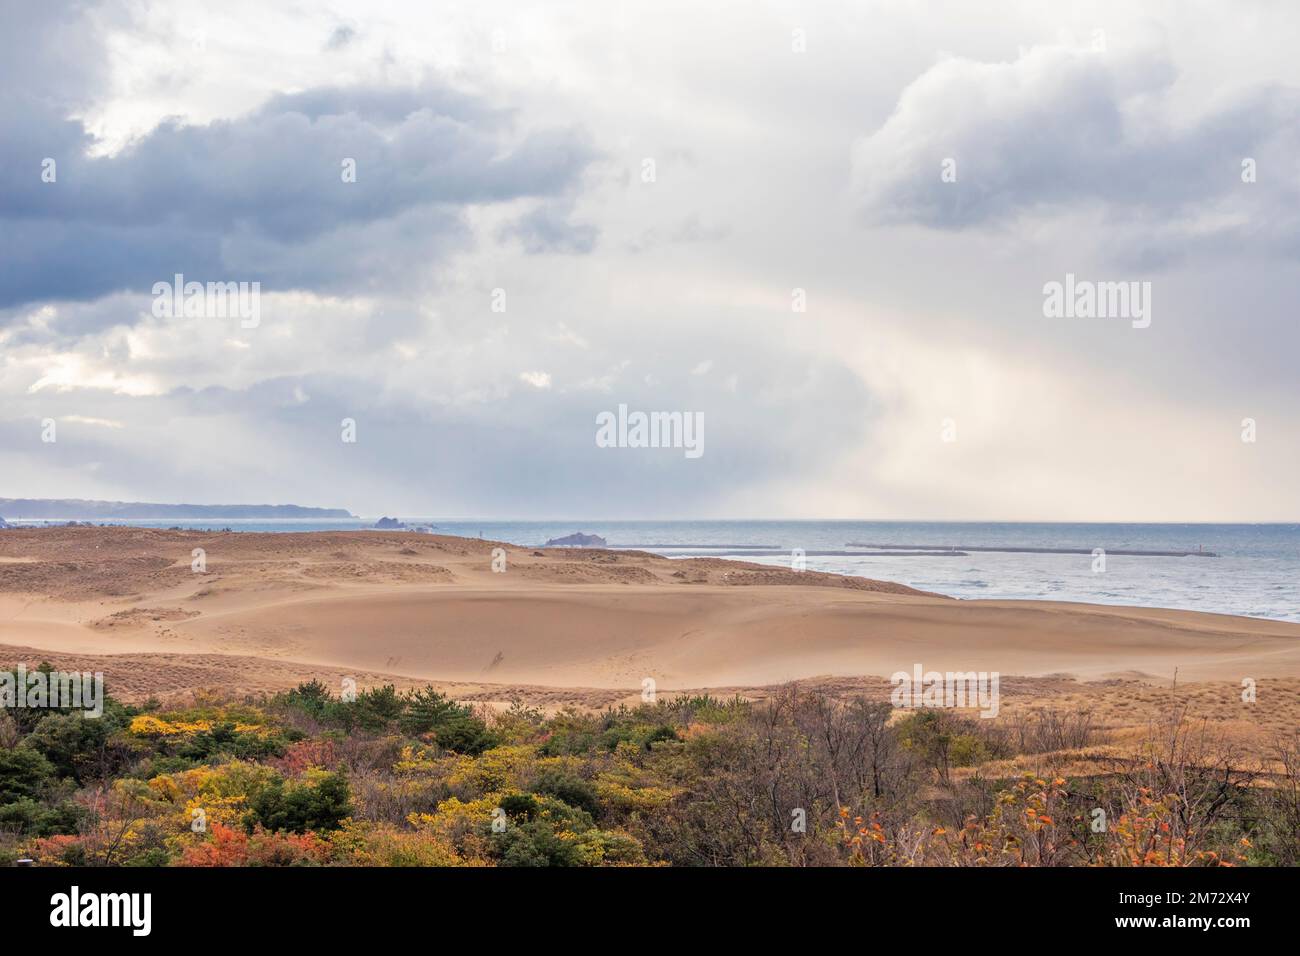 The autumn view of Tottori Sand Dunes, located outside the city center of Tottori in Tottori Prefecture, Japan. The backgroud is Sea of Japan. Stock Photo